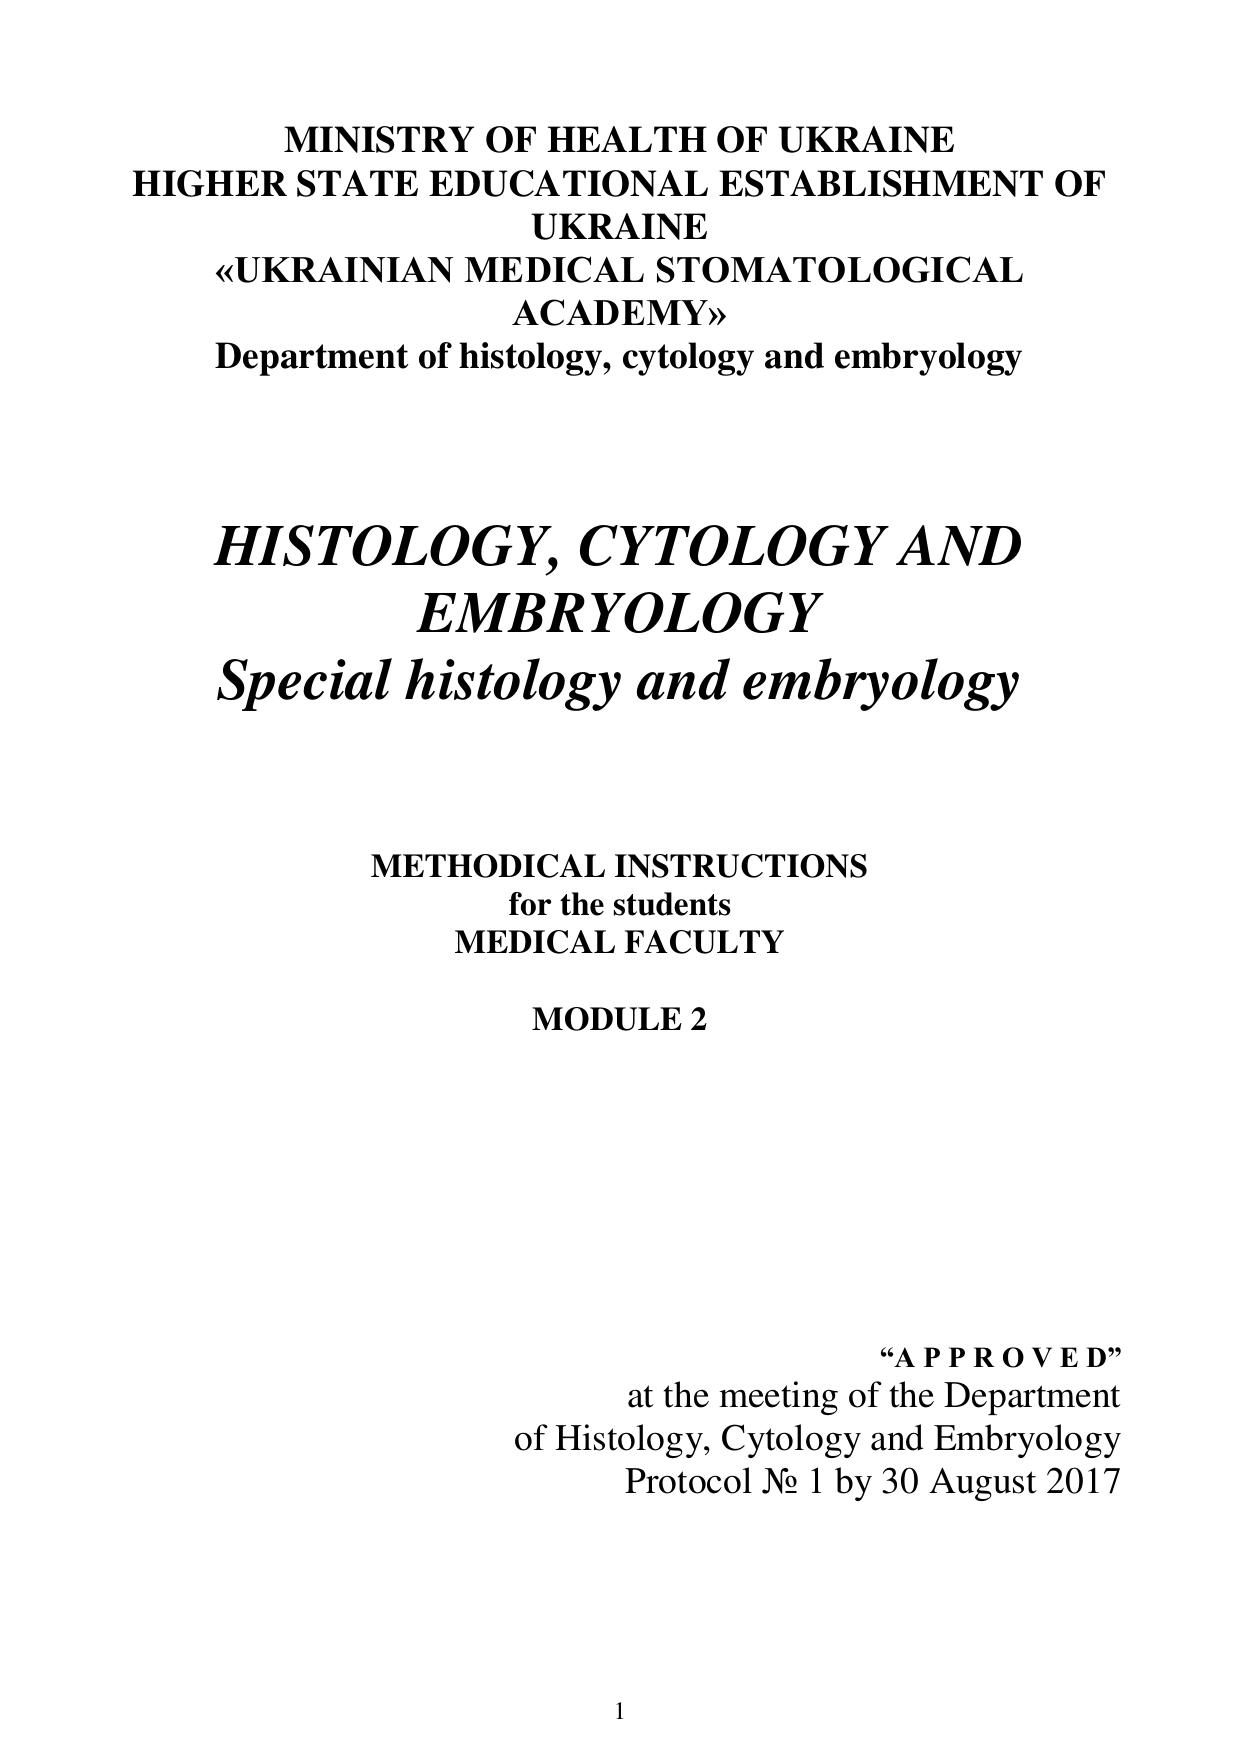 HISTOLOGY, CYTOLOGY AND EMBRYOLOGY Special histology 2017